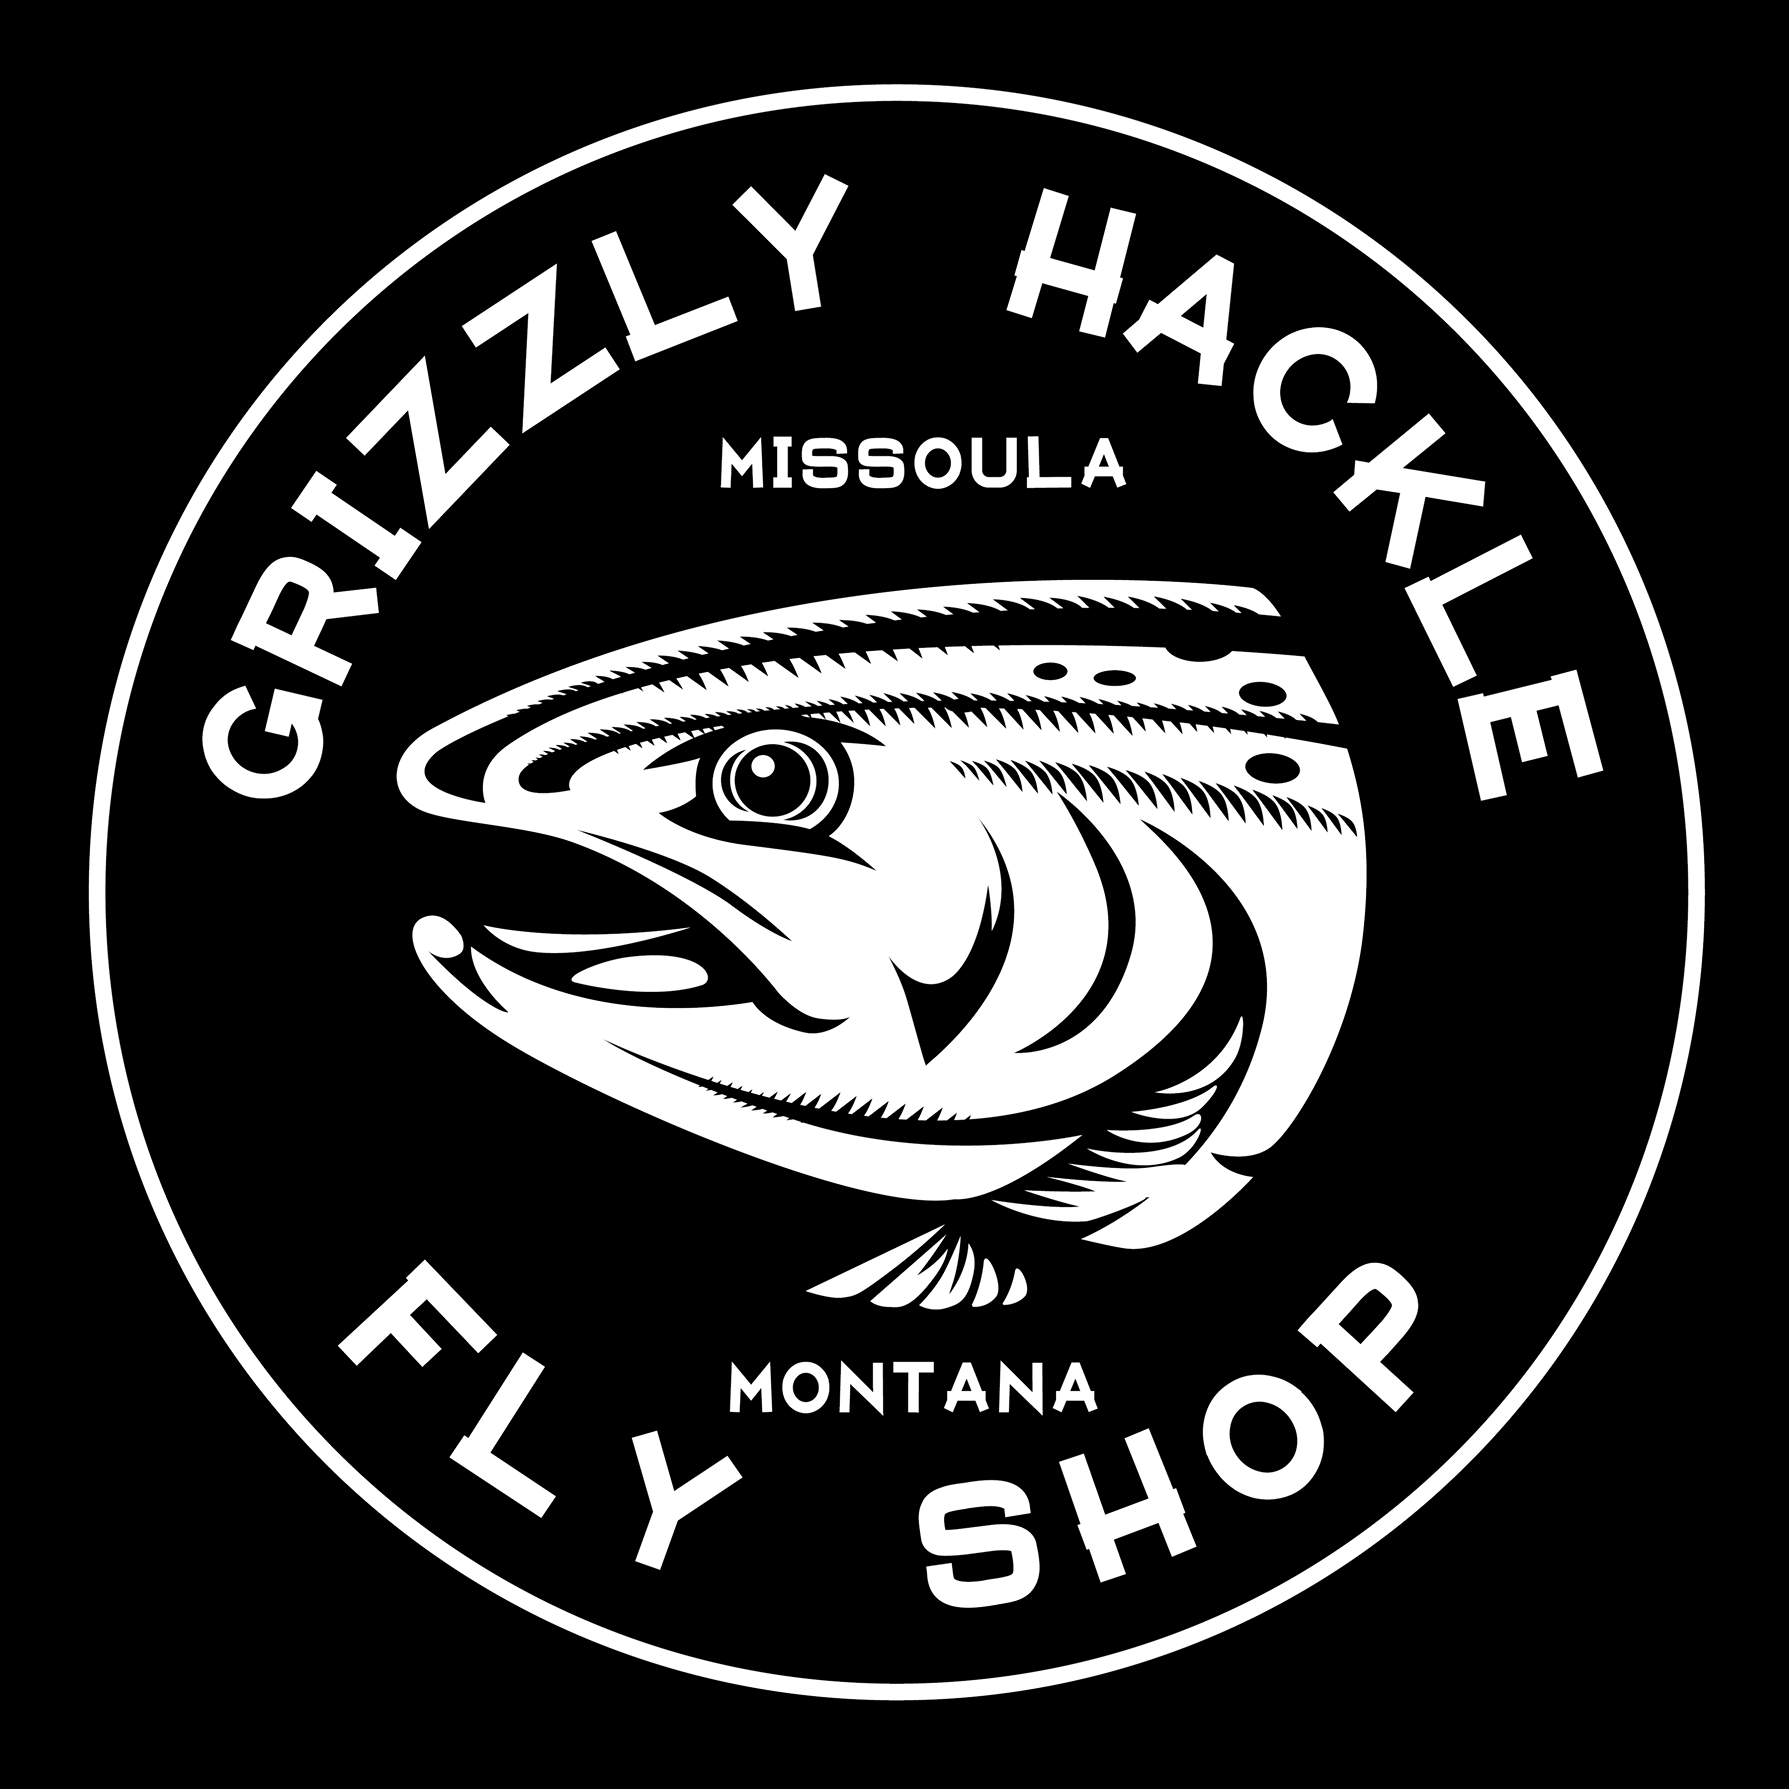 Company logo of Grizzly Hackle Fly Shop